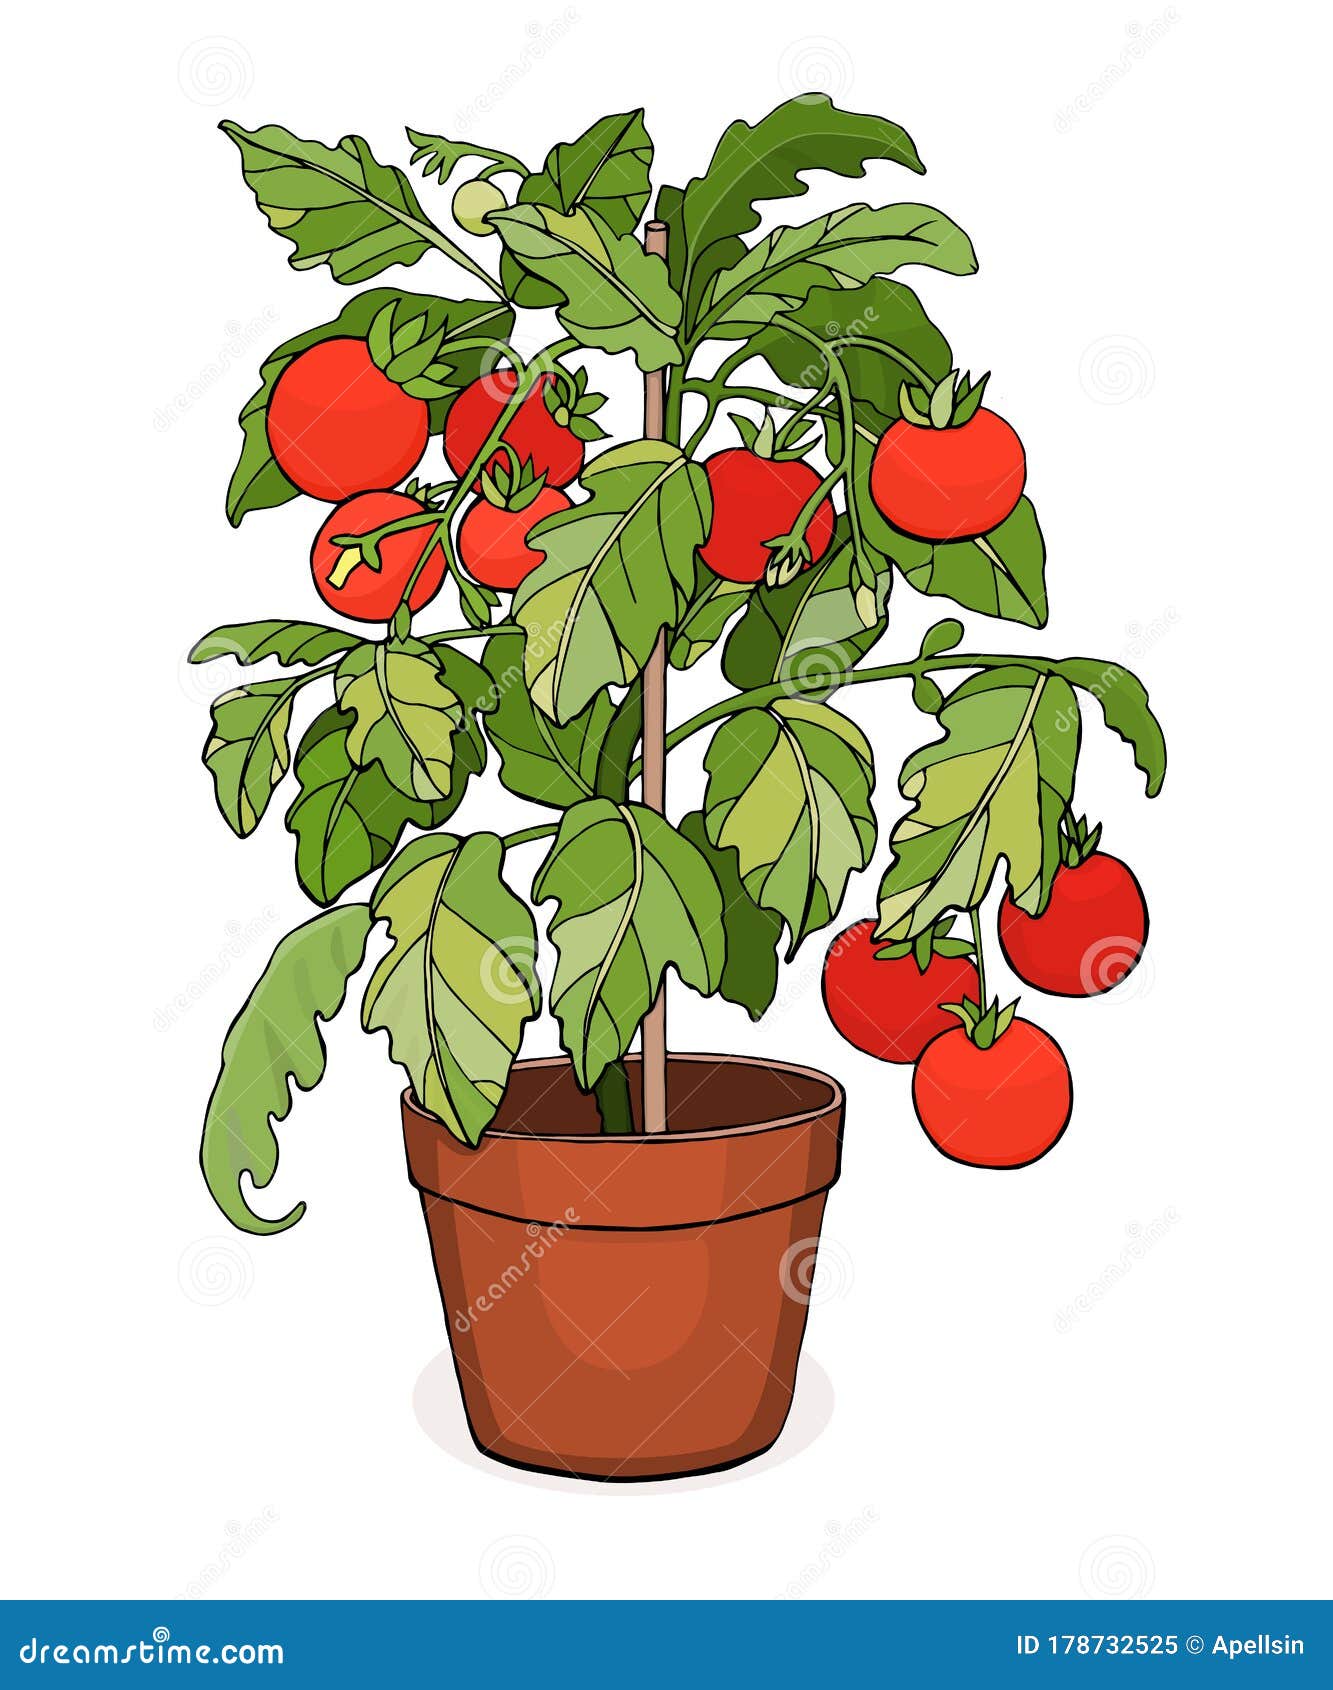 Tomato plant in a pot stock vector. Illustration of organic - 178732525